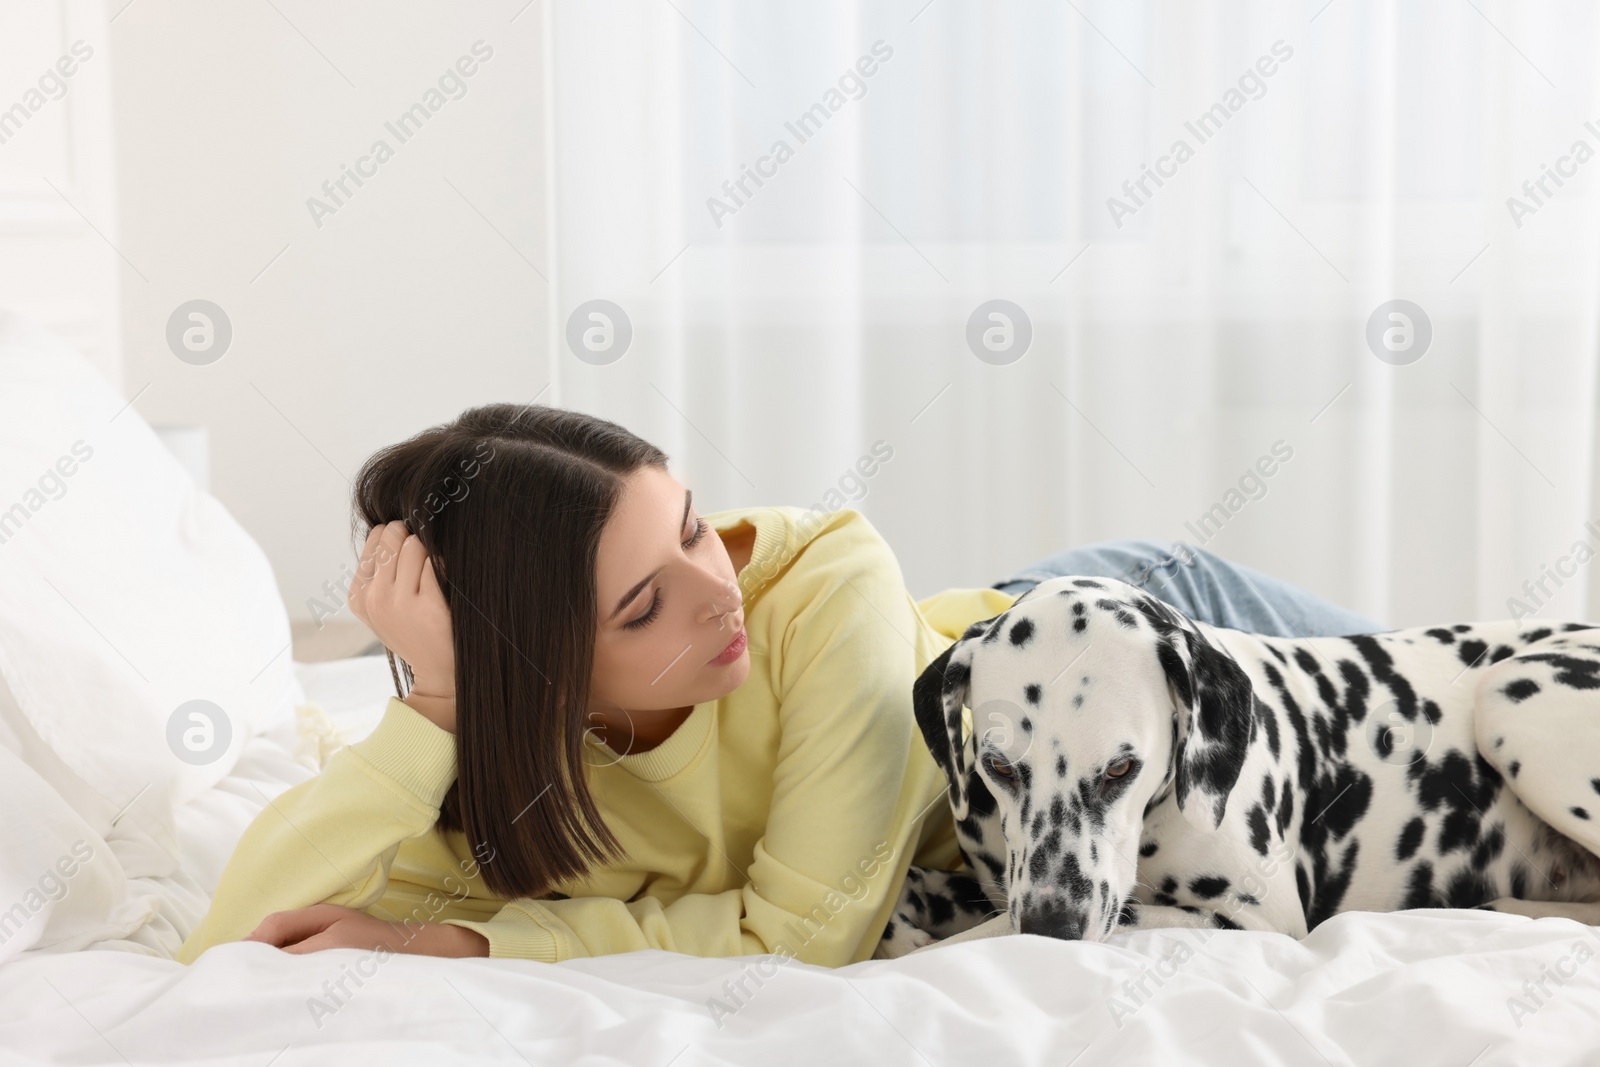 Photo of Beautiful woman with her adorable Dalmatian dog on bed at home. Lovely pet